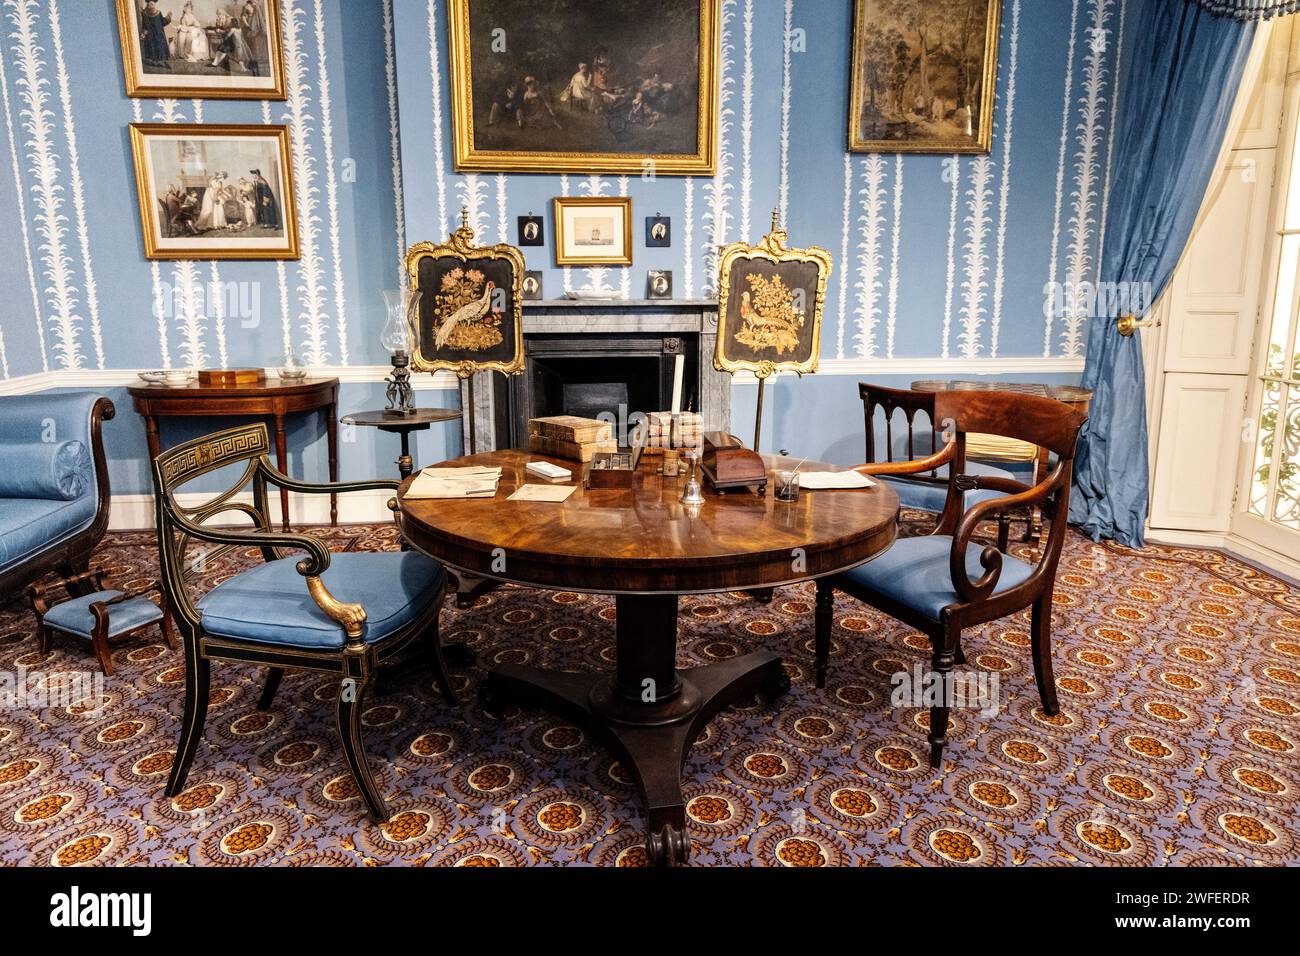 An 1830s drawing room with round table and armchairs Stock Photo